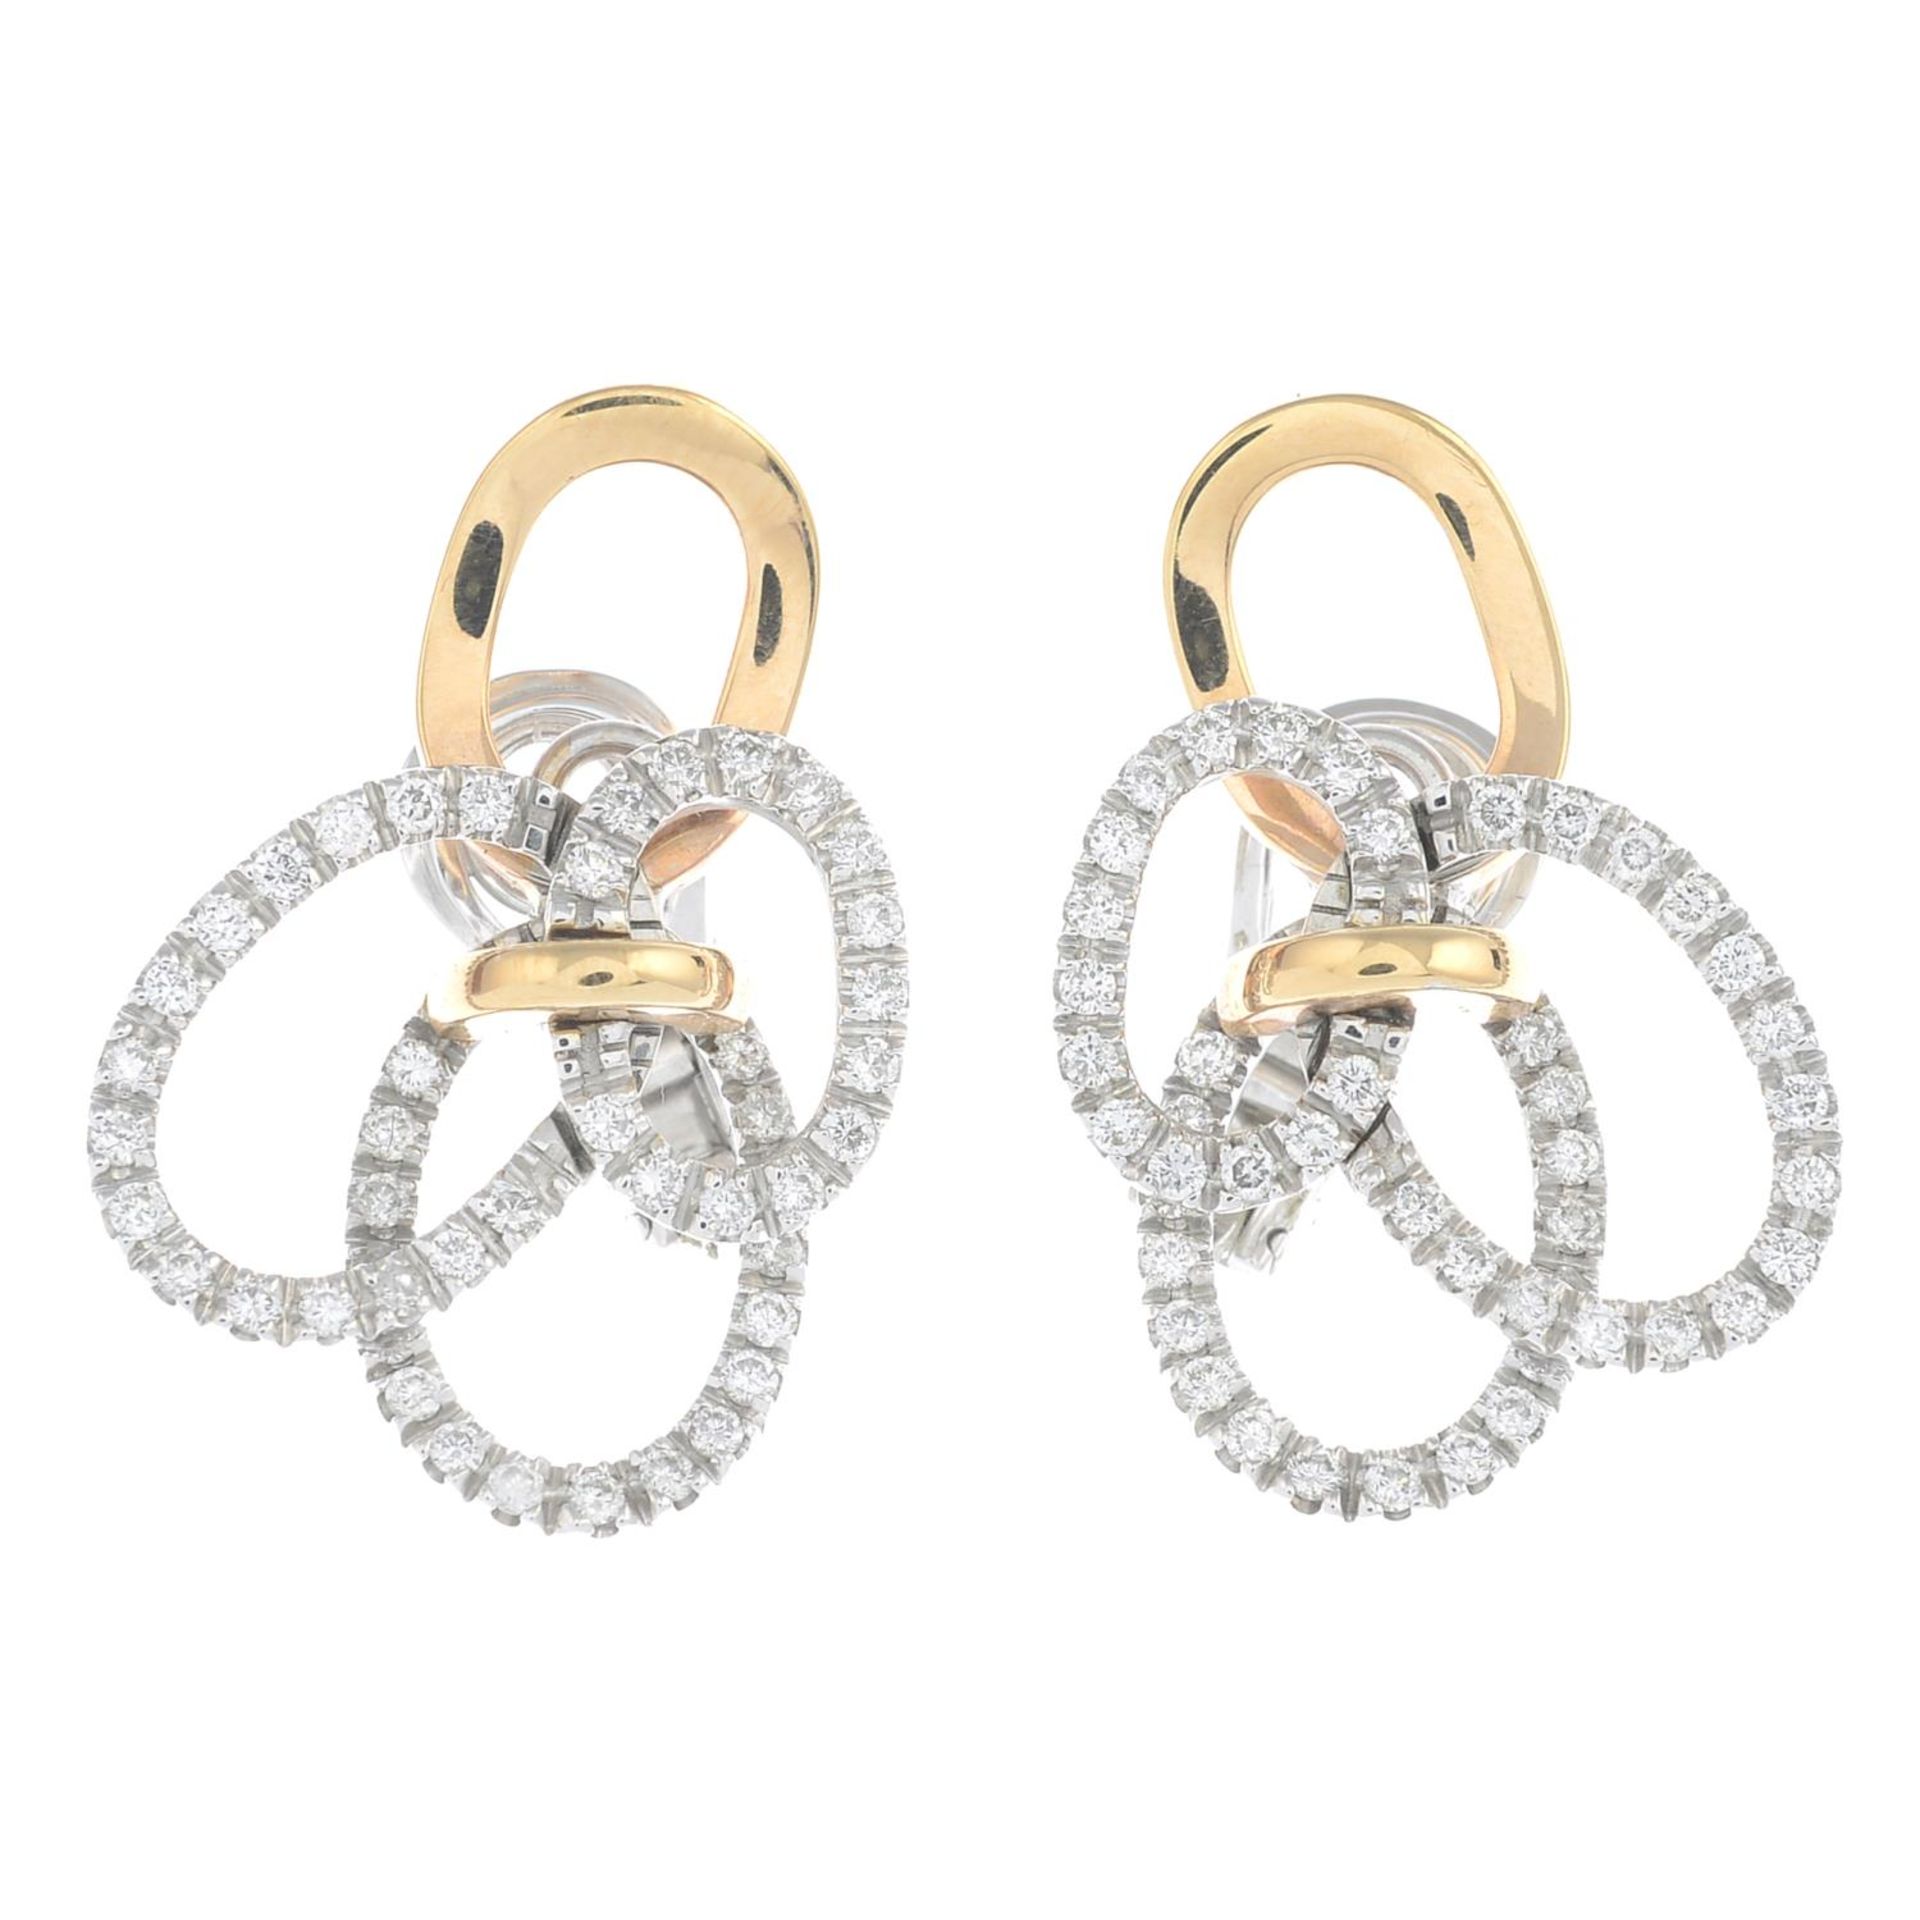 A pair of 18ct gold brilliant-cut diamond earrings.Estimated total diamond weight 1.10cts.Hallmarks